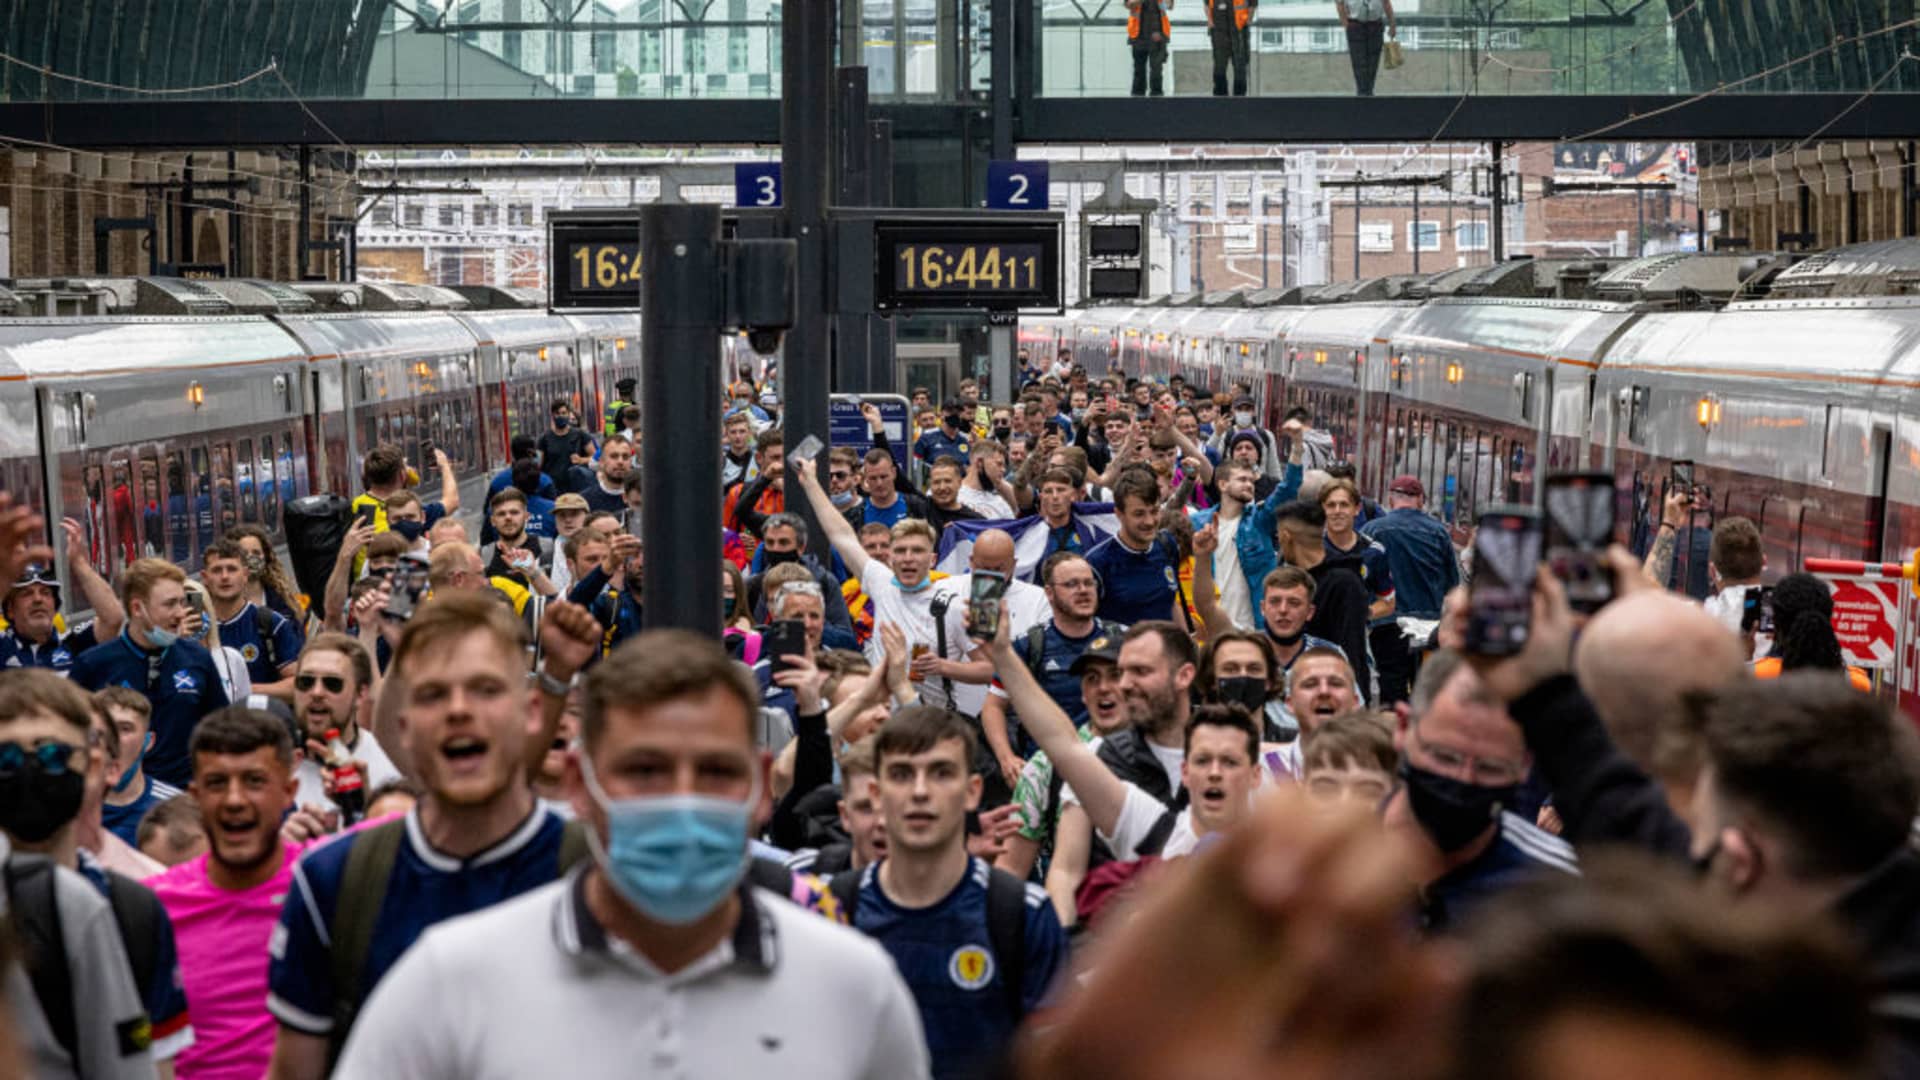 Scotland fans arrive at King's Cross Station on June 17, 2021 in London, England. Soccer games, taking place during the Euros, have been blamed for a rise in Covid cases numbers.